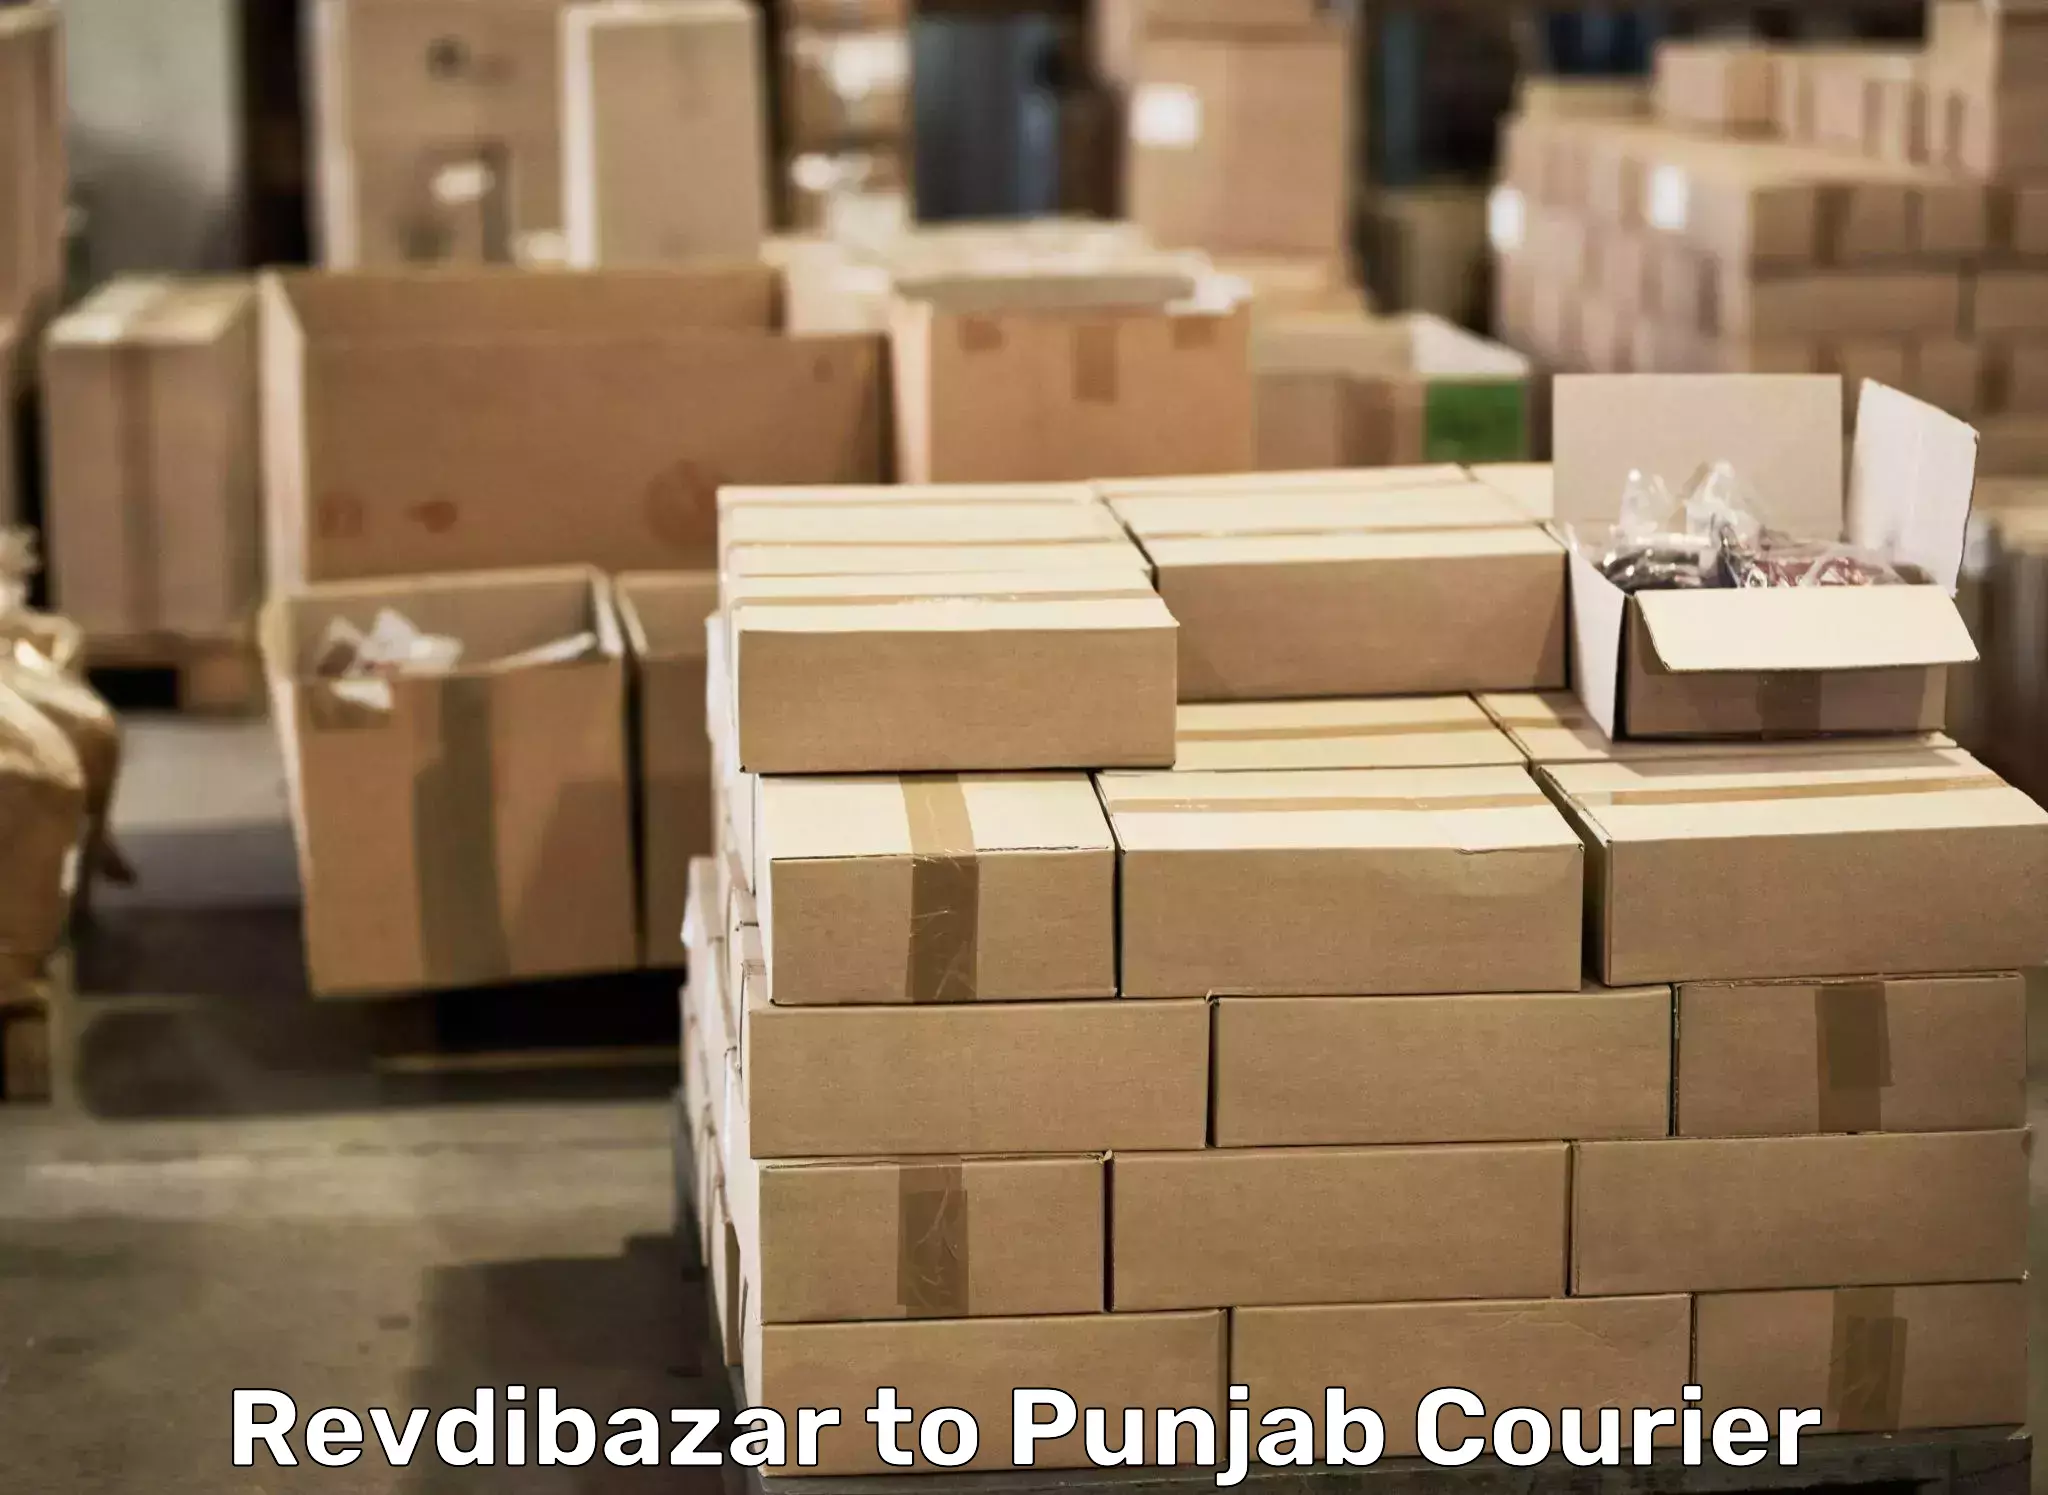 Quality furniture transport in Revdibazar to Pathankot